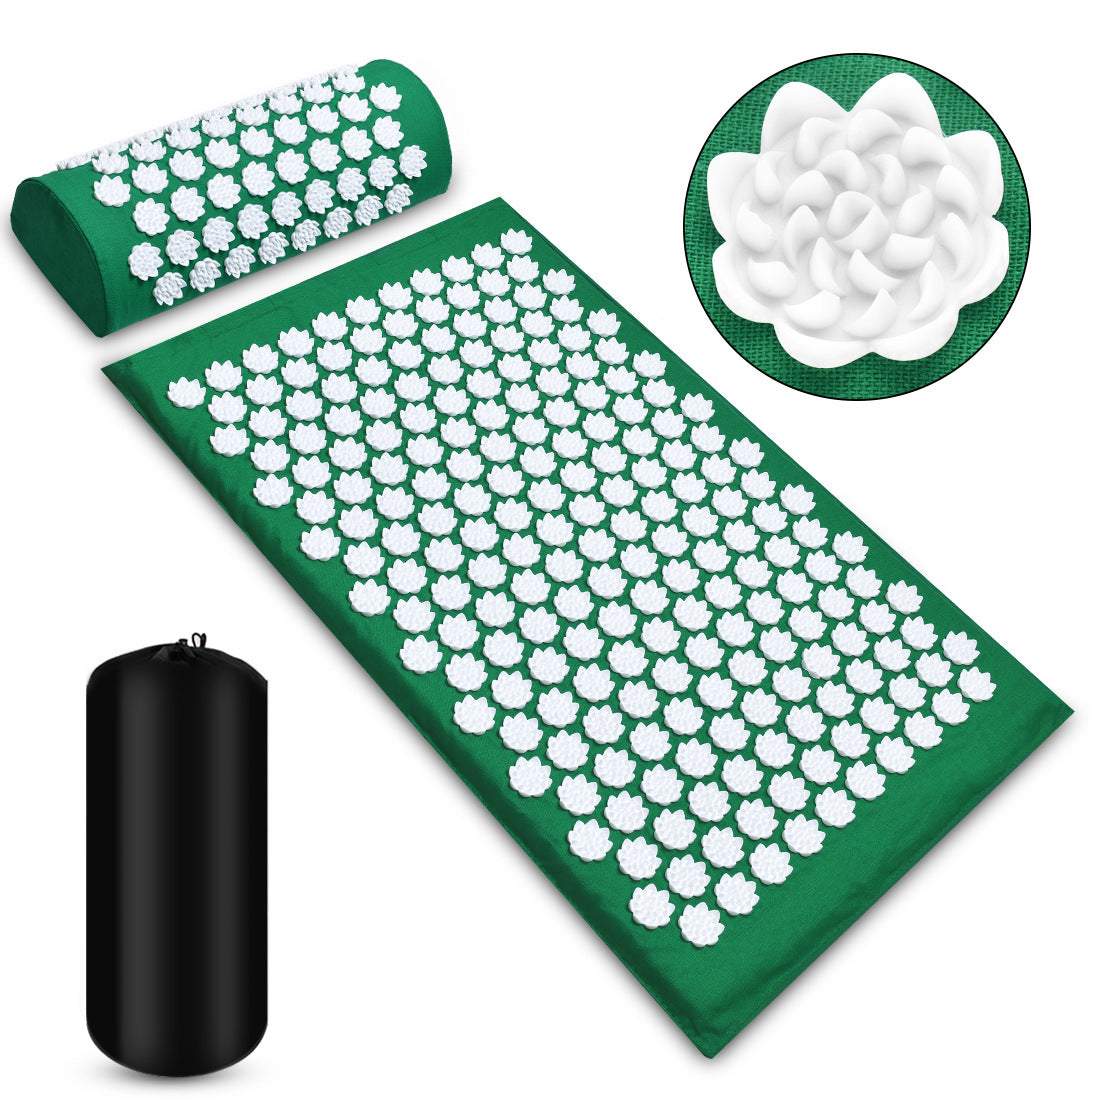 Acupressure Mat - home • office • health - green accupressure mat shown with white lotus; come with a black bag for easy transport; close up show high quality of materials